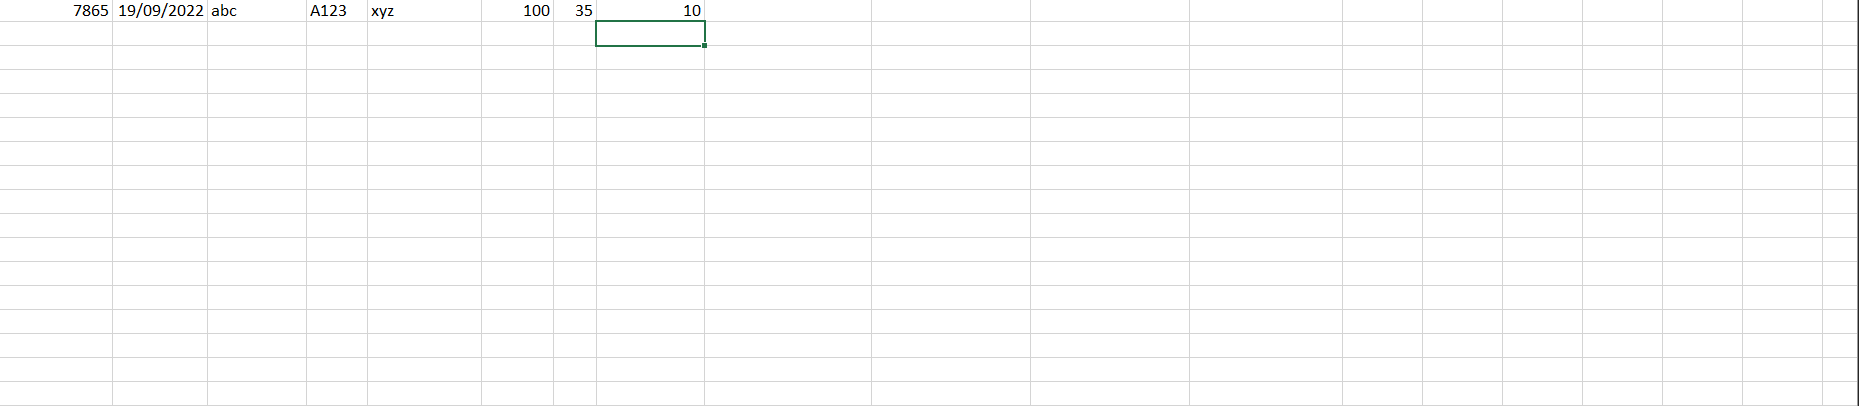 r/excel - how to add the above row x times in excel based on the number y which can change